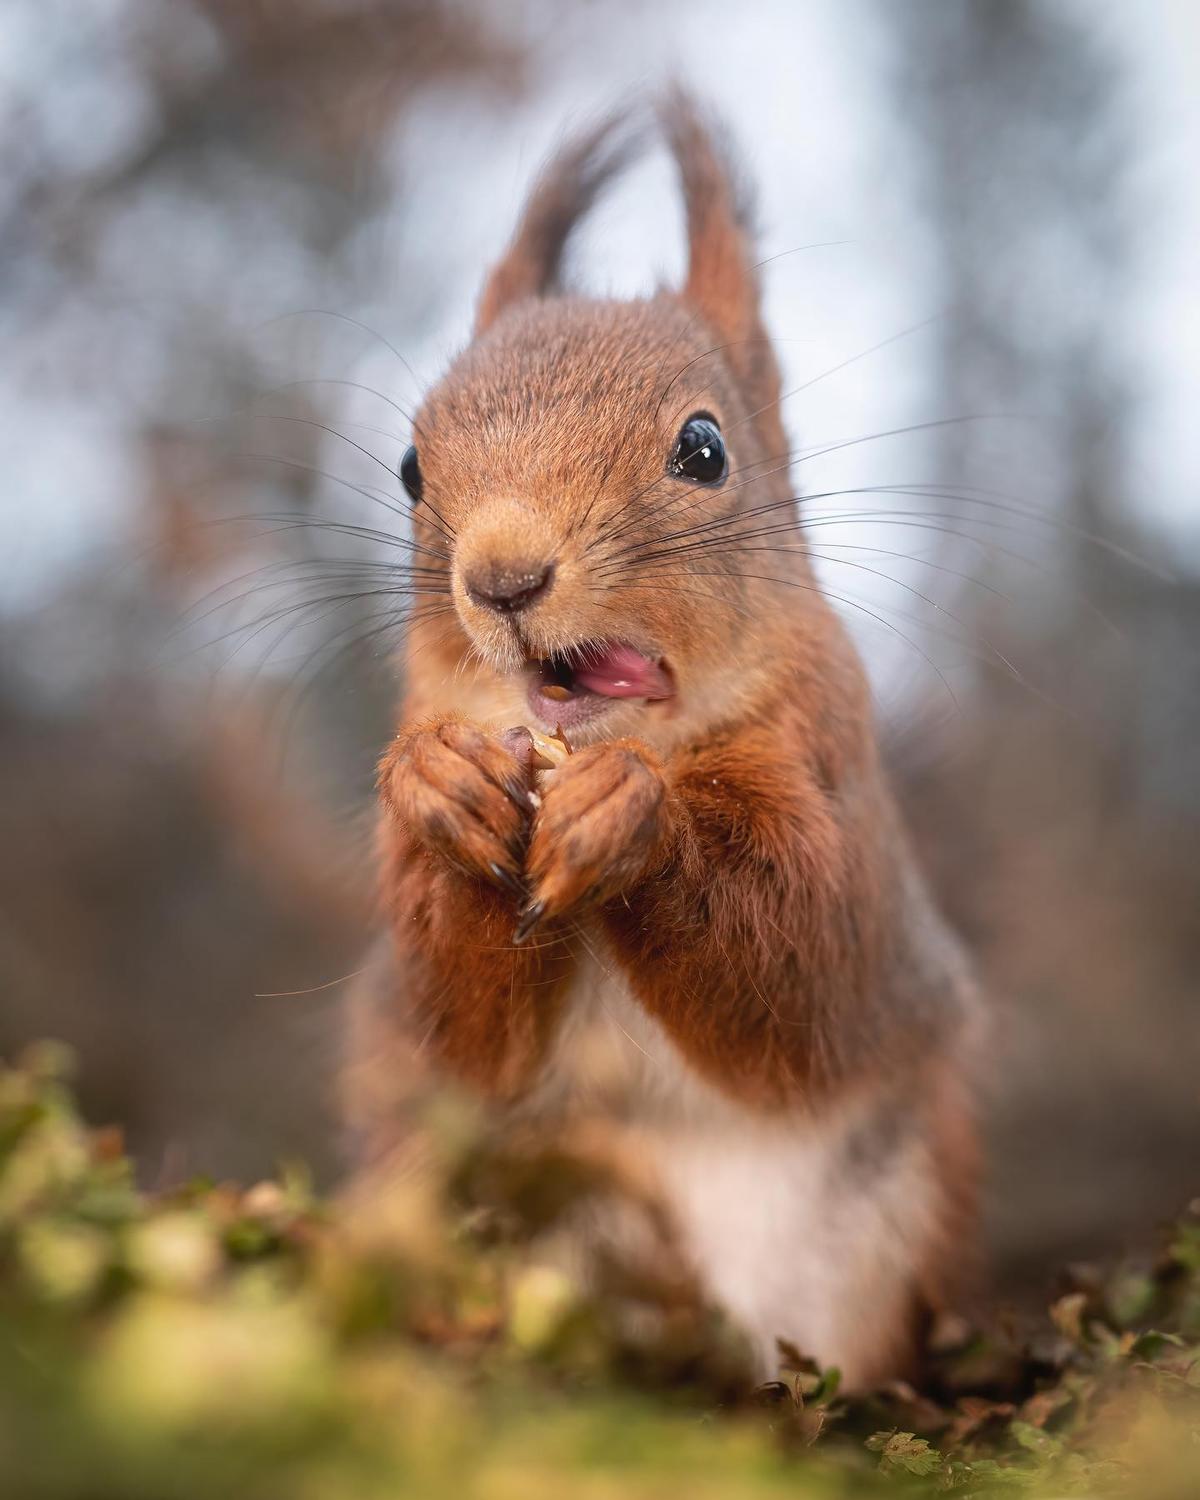 "Behold, the squirrel maestro, conducting a symphony of silliness!". (Courtesy of <a href="https://www.instagram.com/squirrels_by_fotoscenen/">Johnny Kääpä</a>)